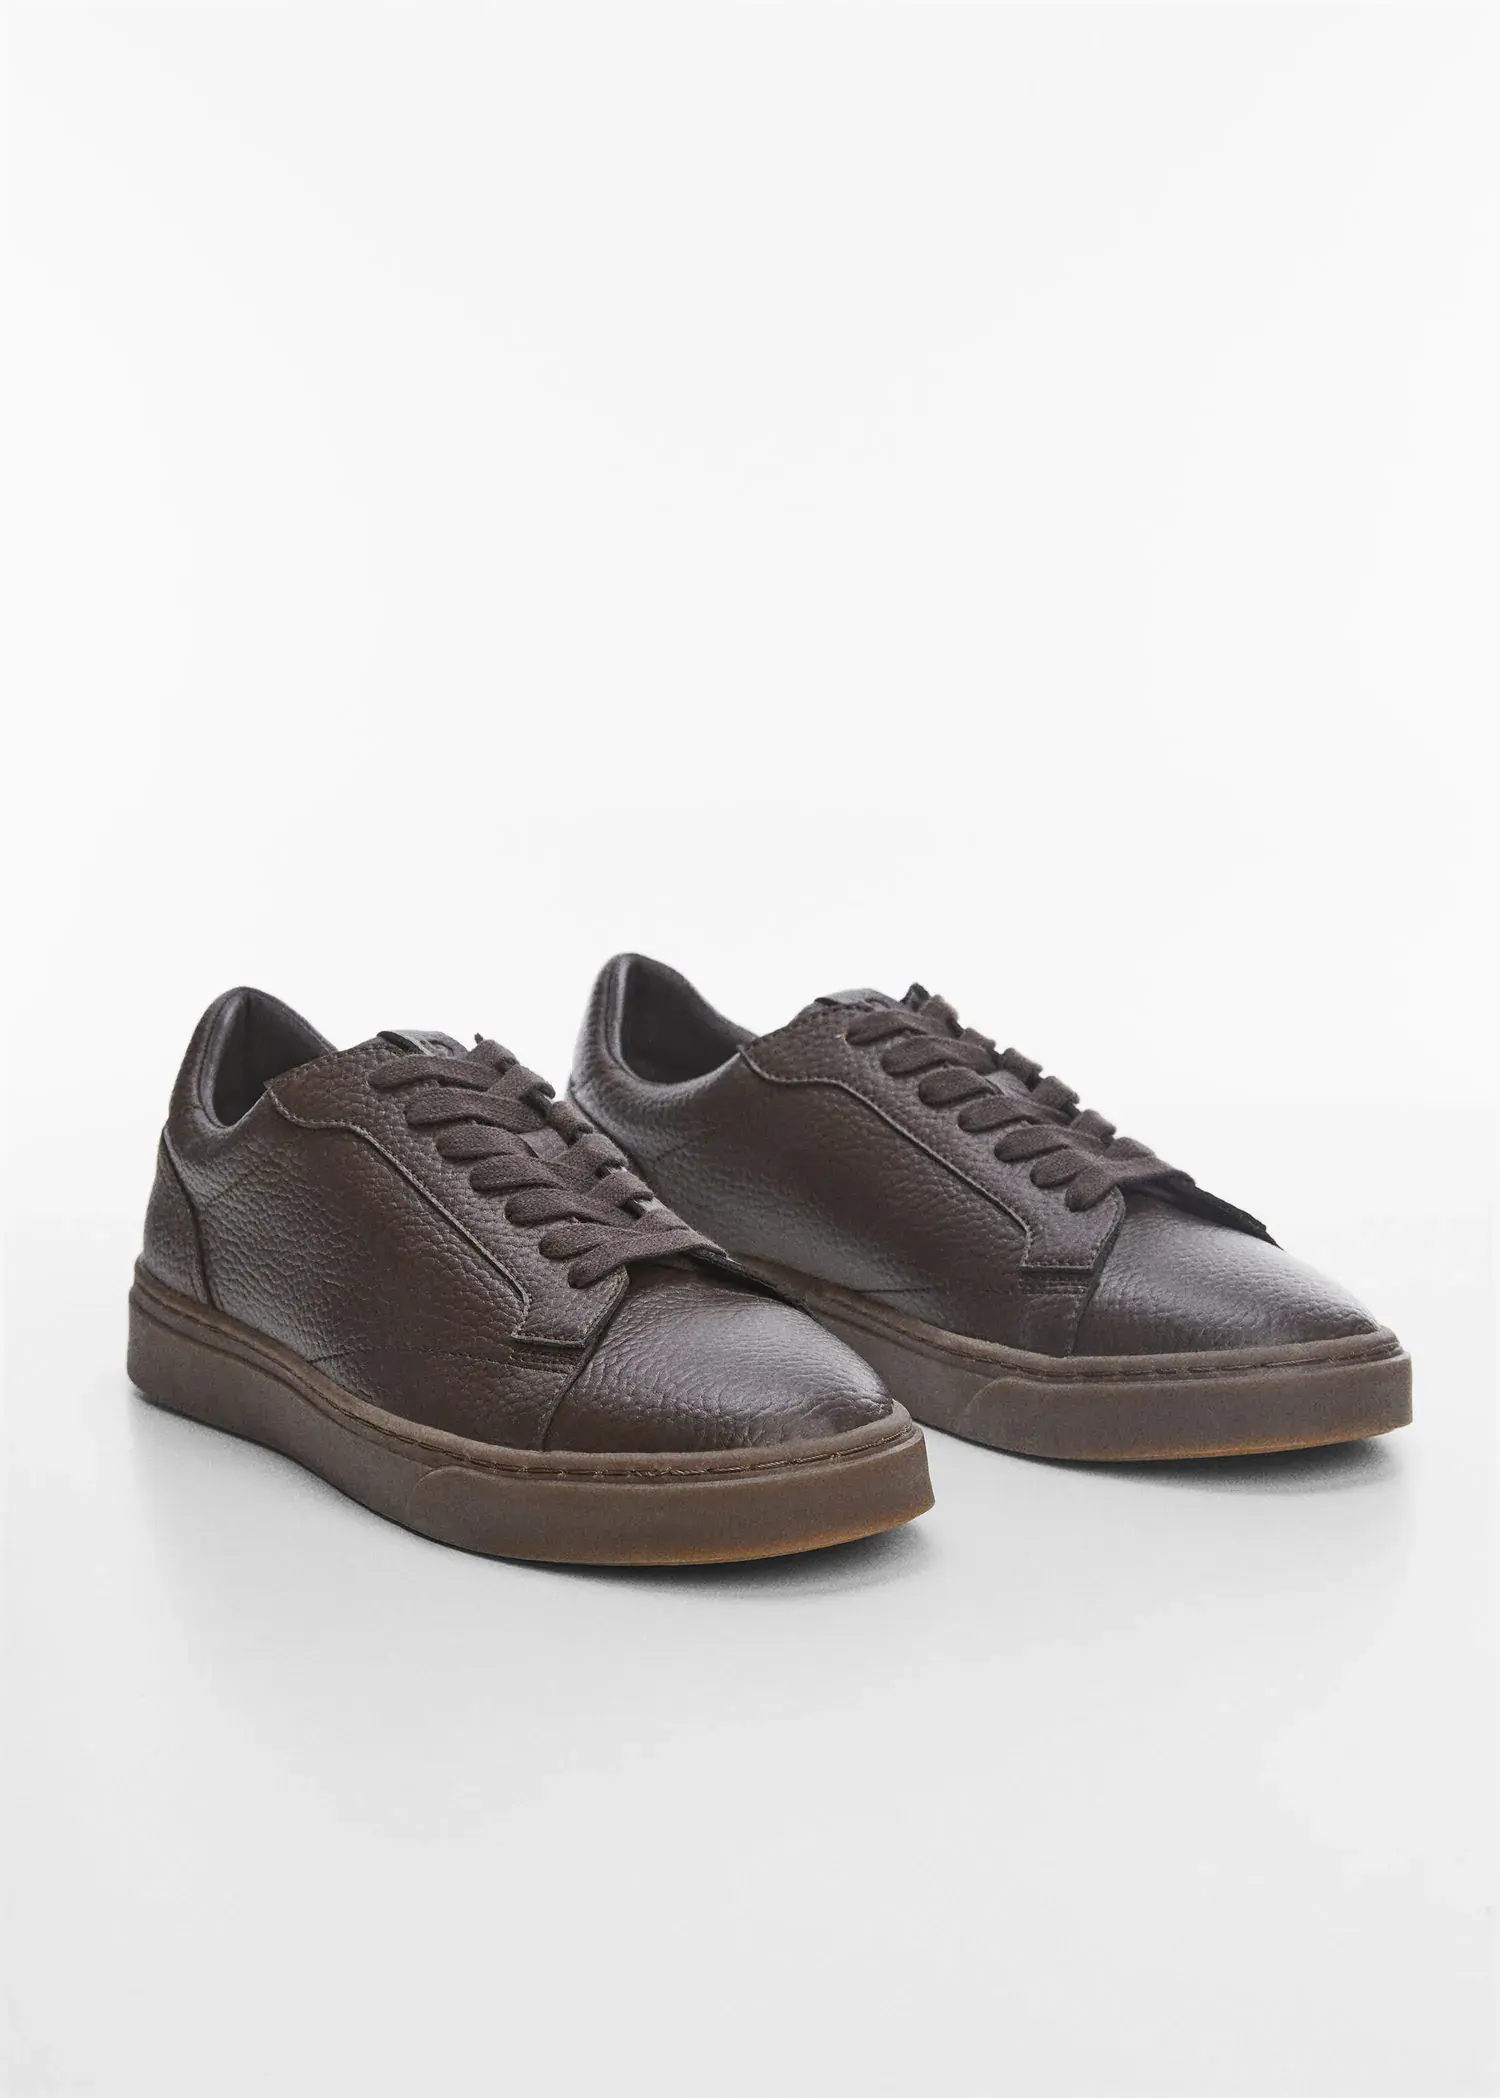 Mango Pebbled leather sneakers. a pair of brown sneakers on a white surface. 